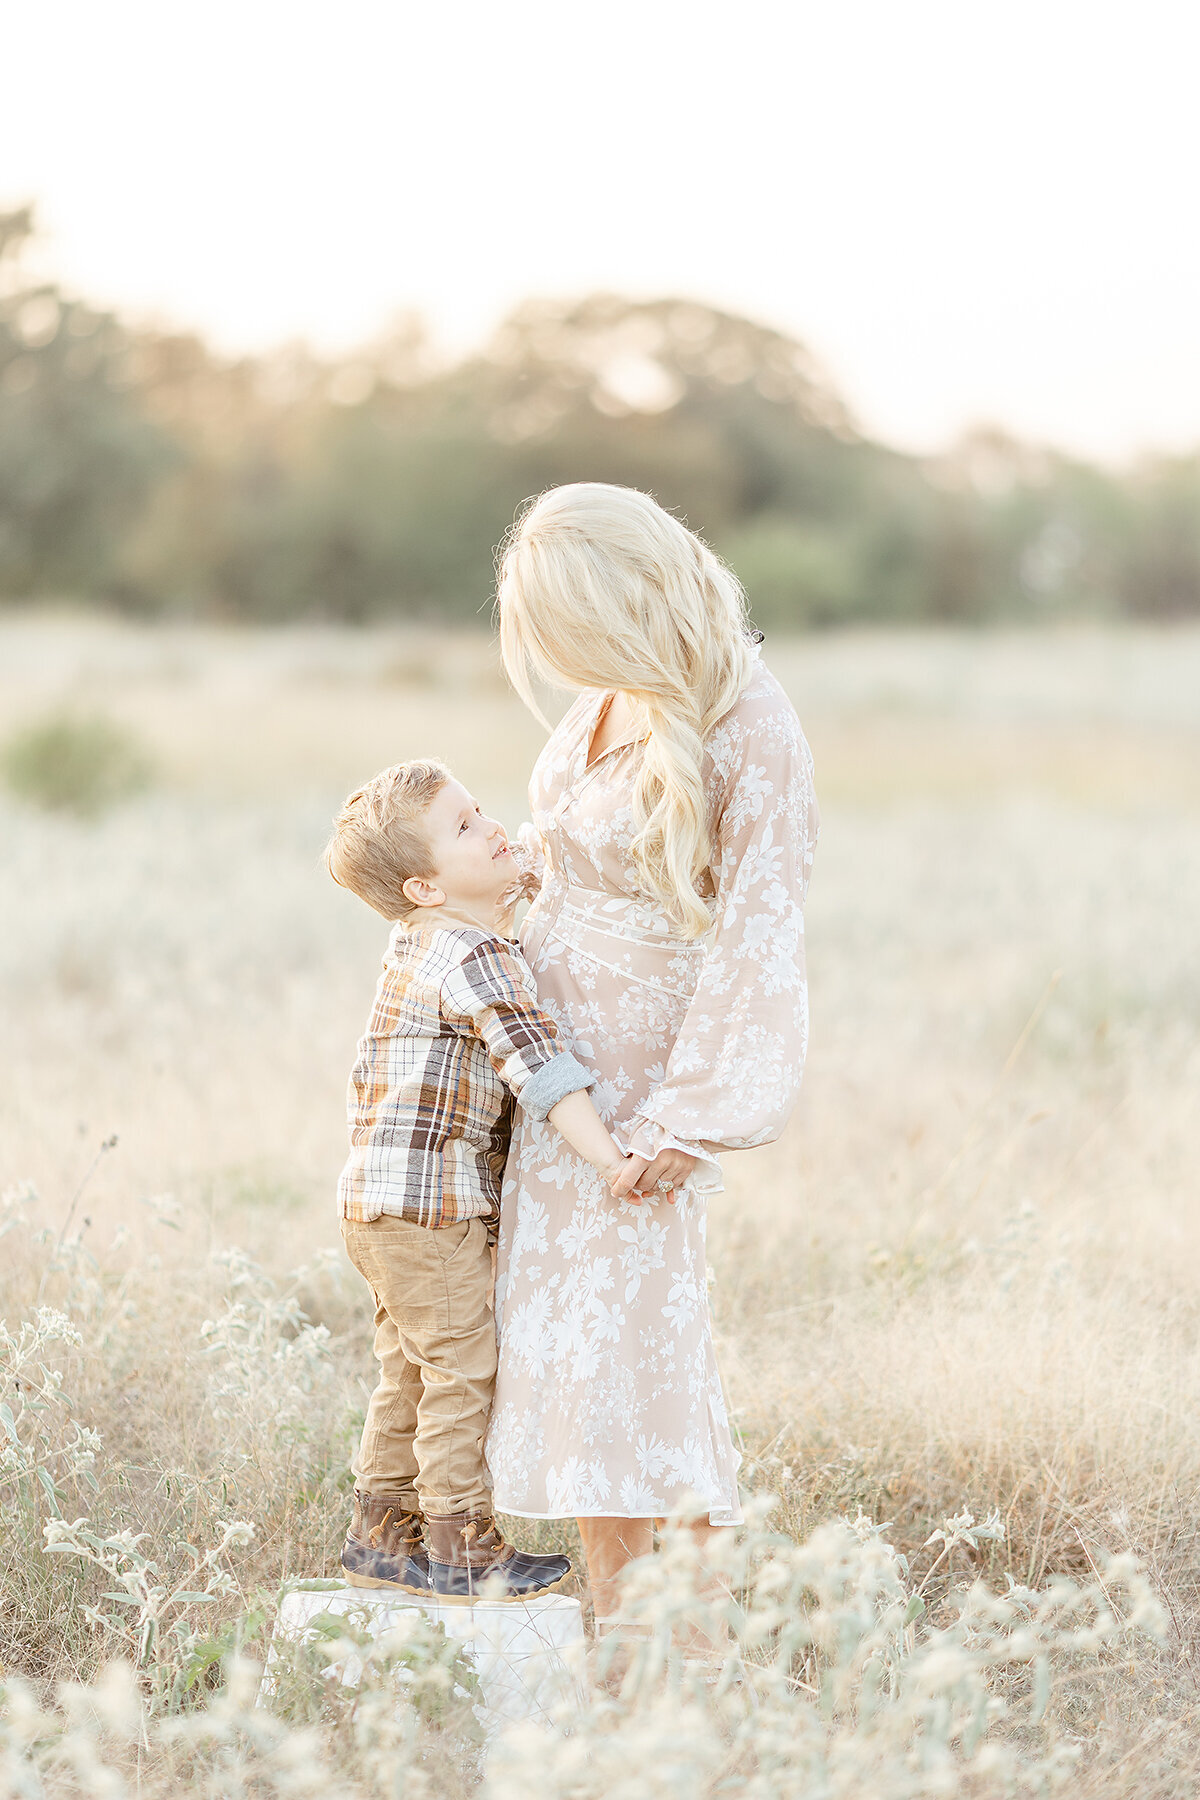 A mother standing in a blooming field with her son as she looks down at him.